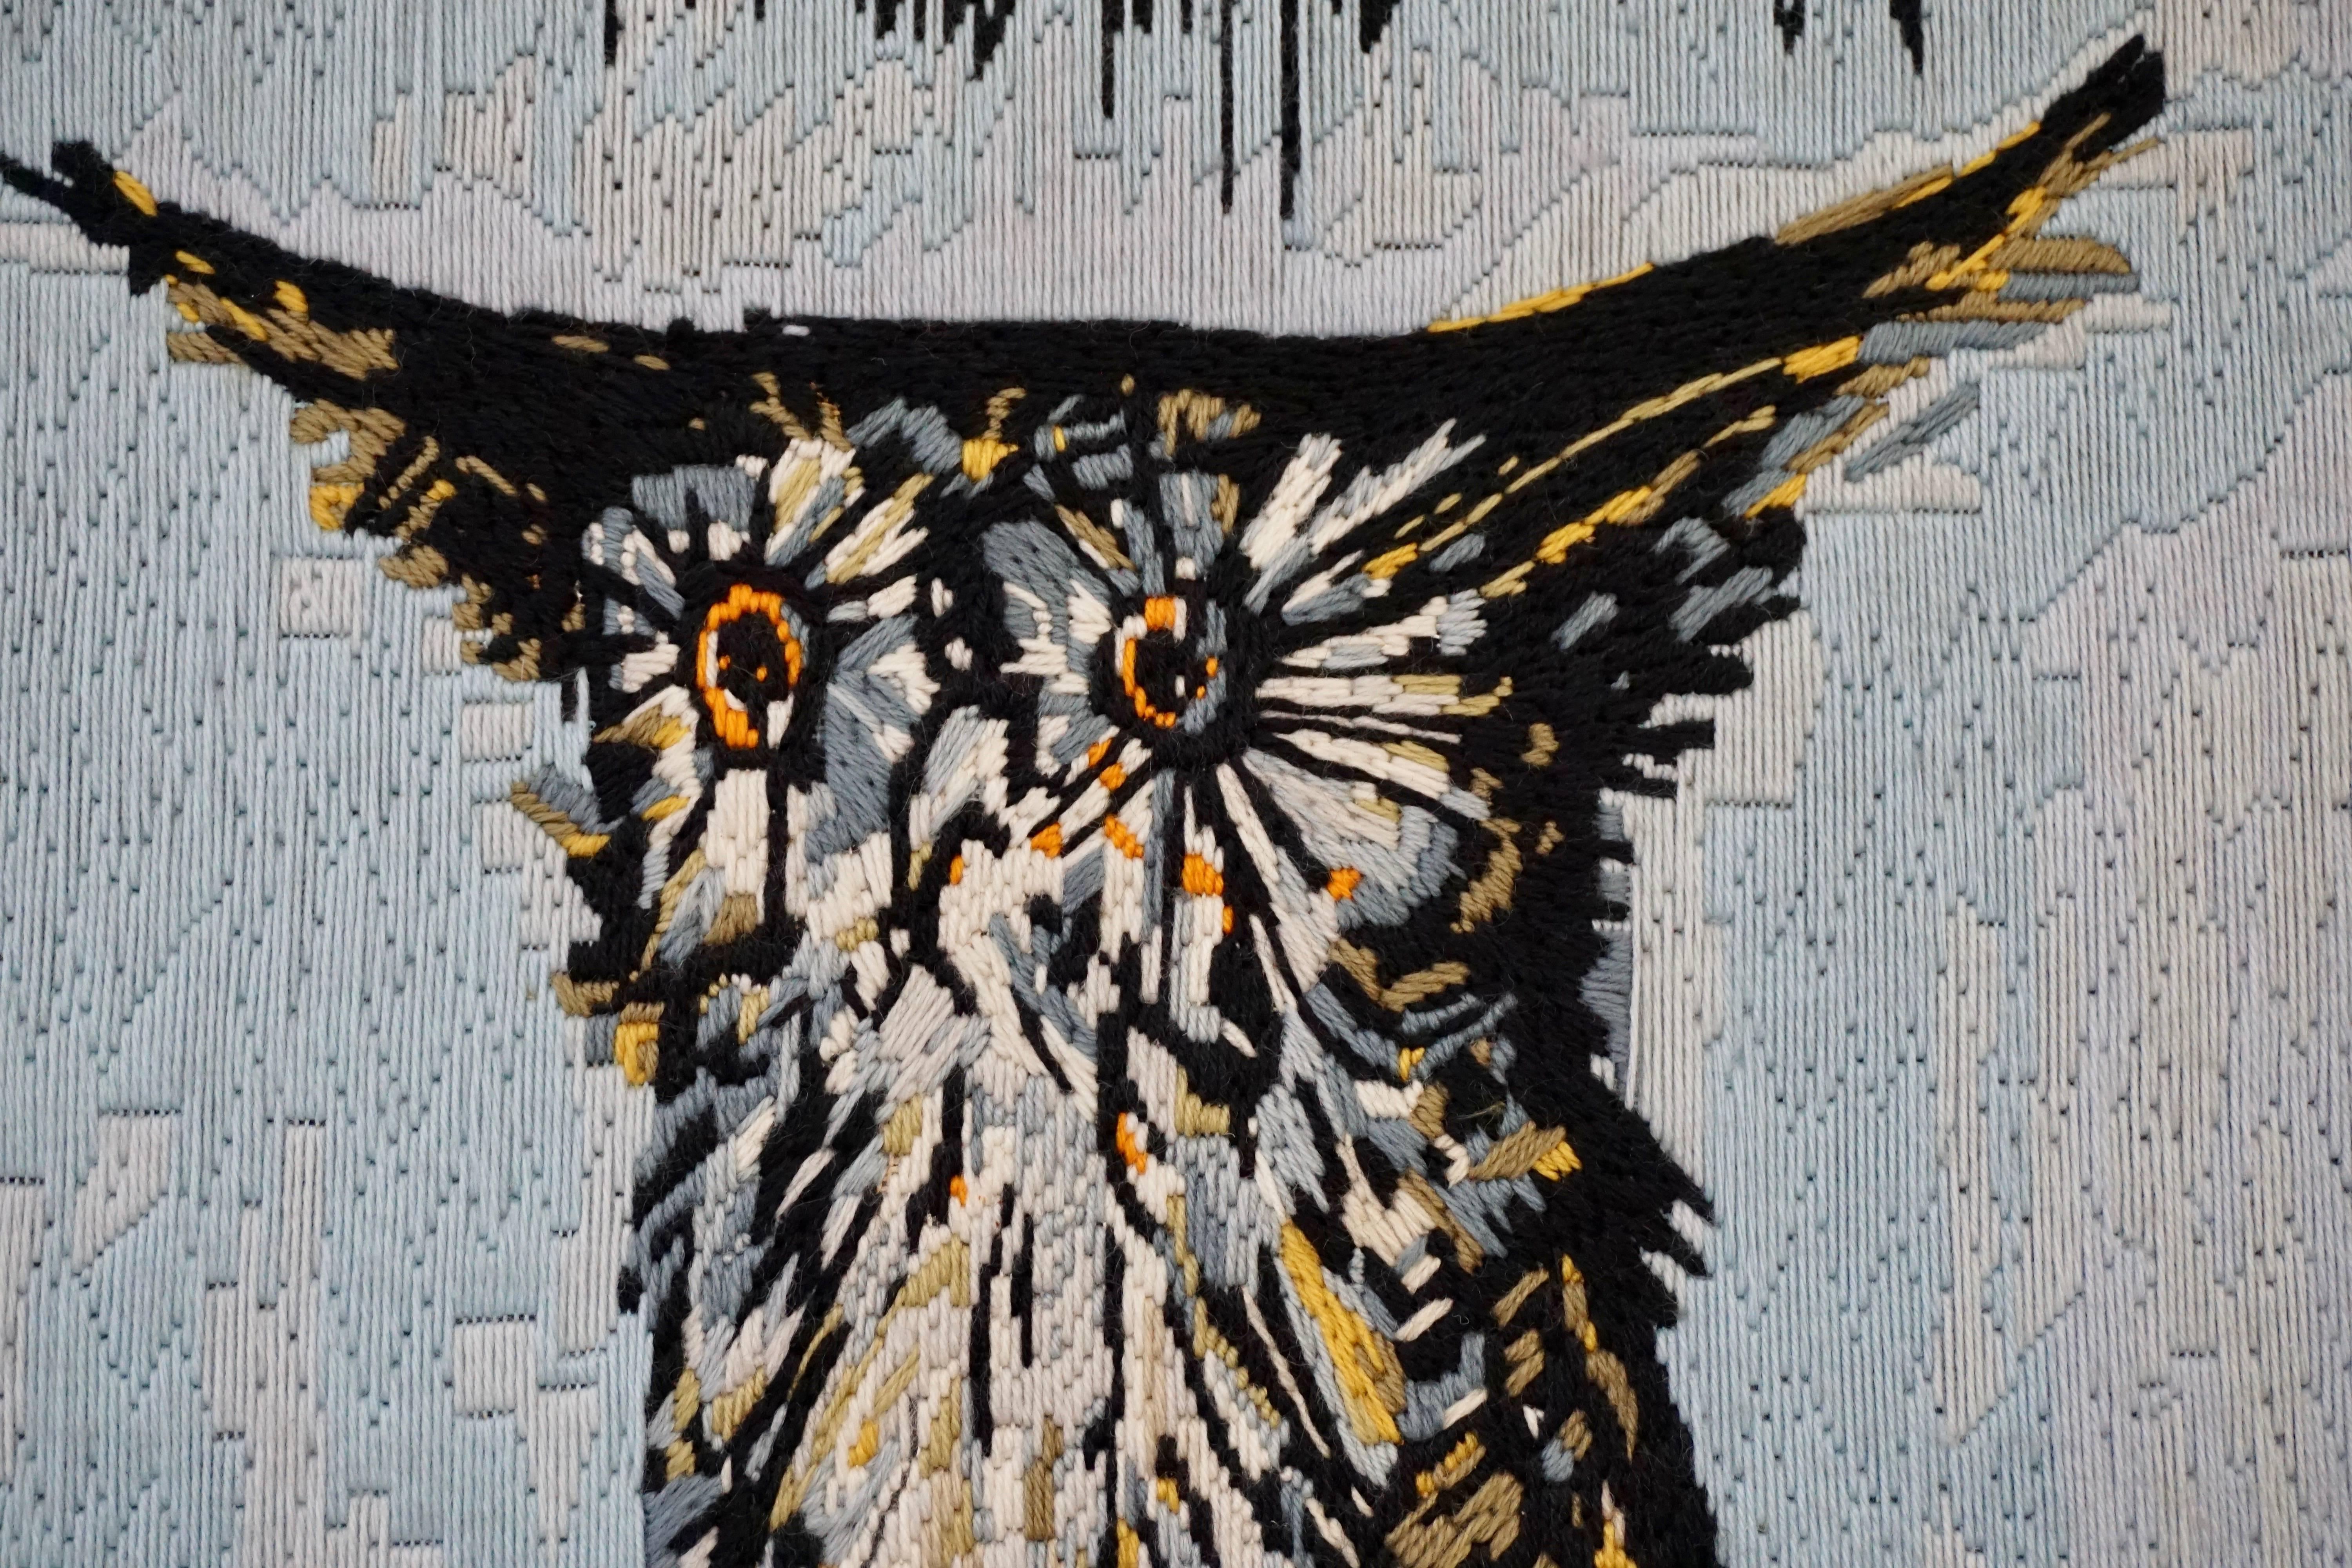 Bernard Buffet the owl wool tapestry.
Tapestry executed by Colette Morin, 1969.
DMC collection.
Dimensions: 53 cm x 63 cm (without frame).
 